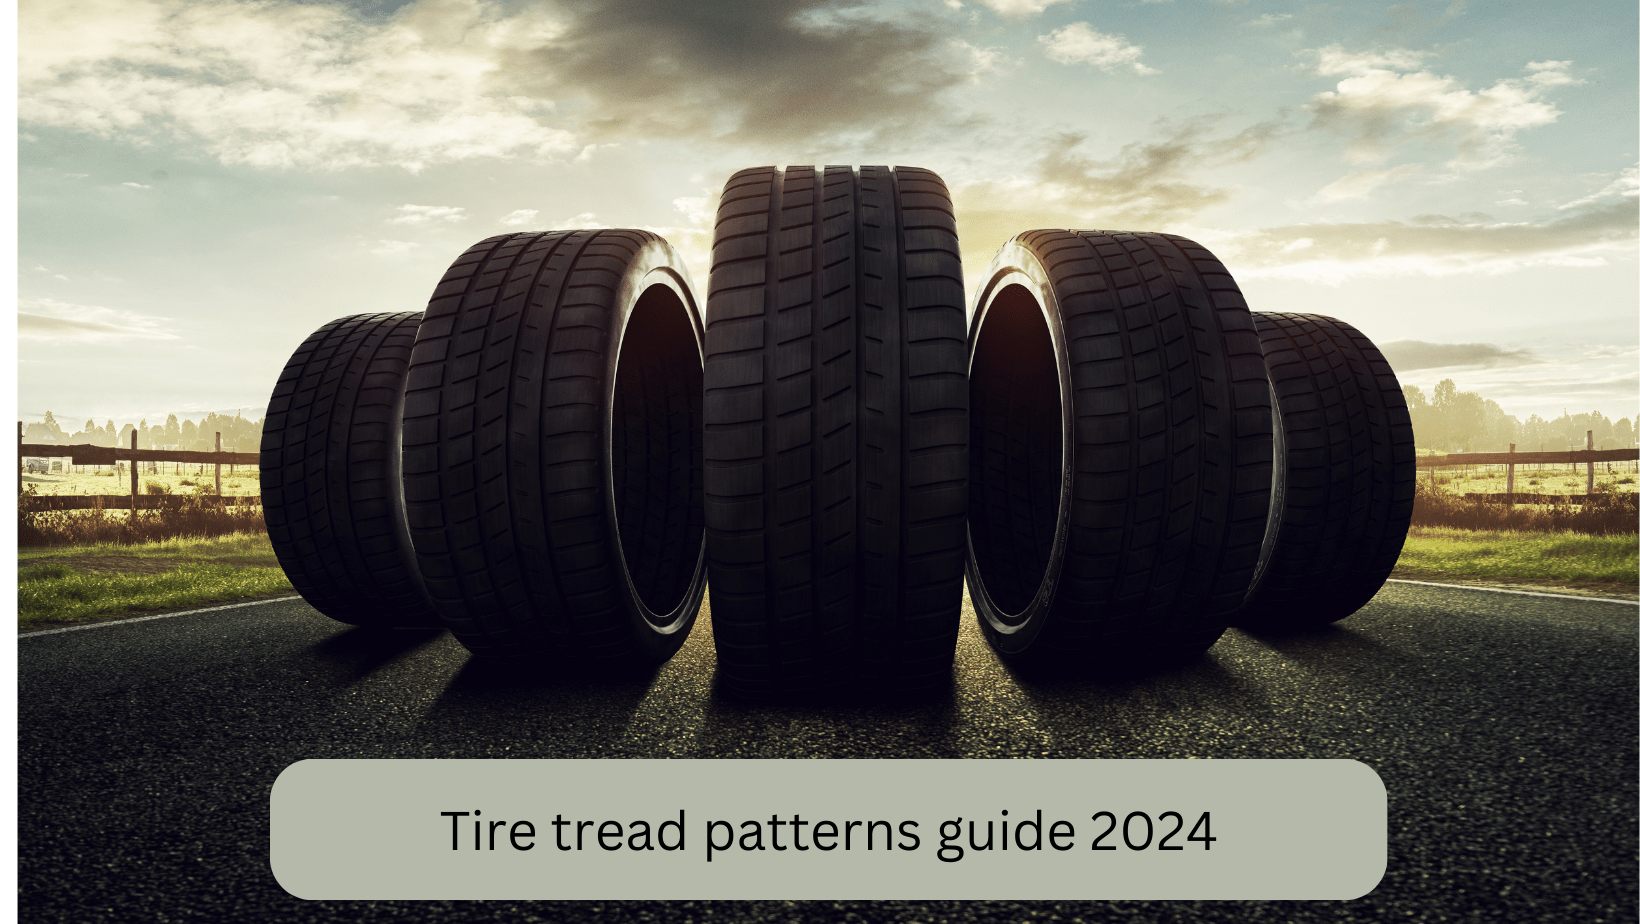 Tire tread patterns, a guide with us